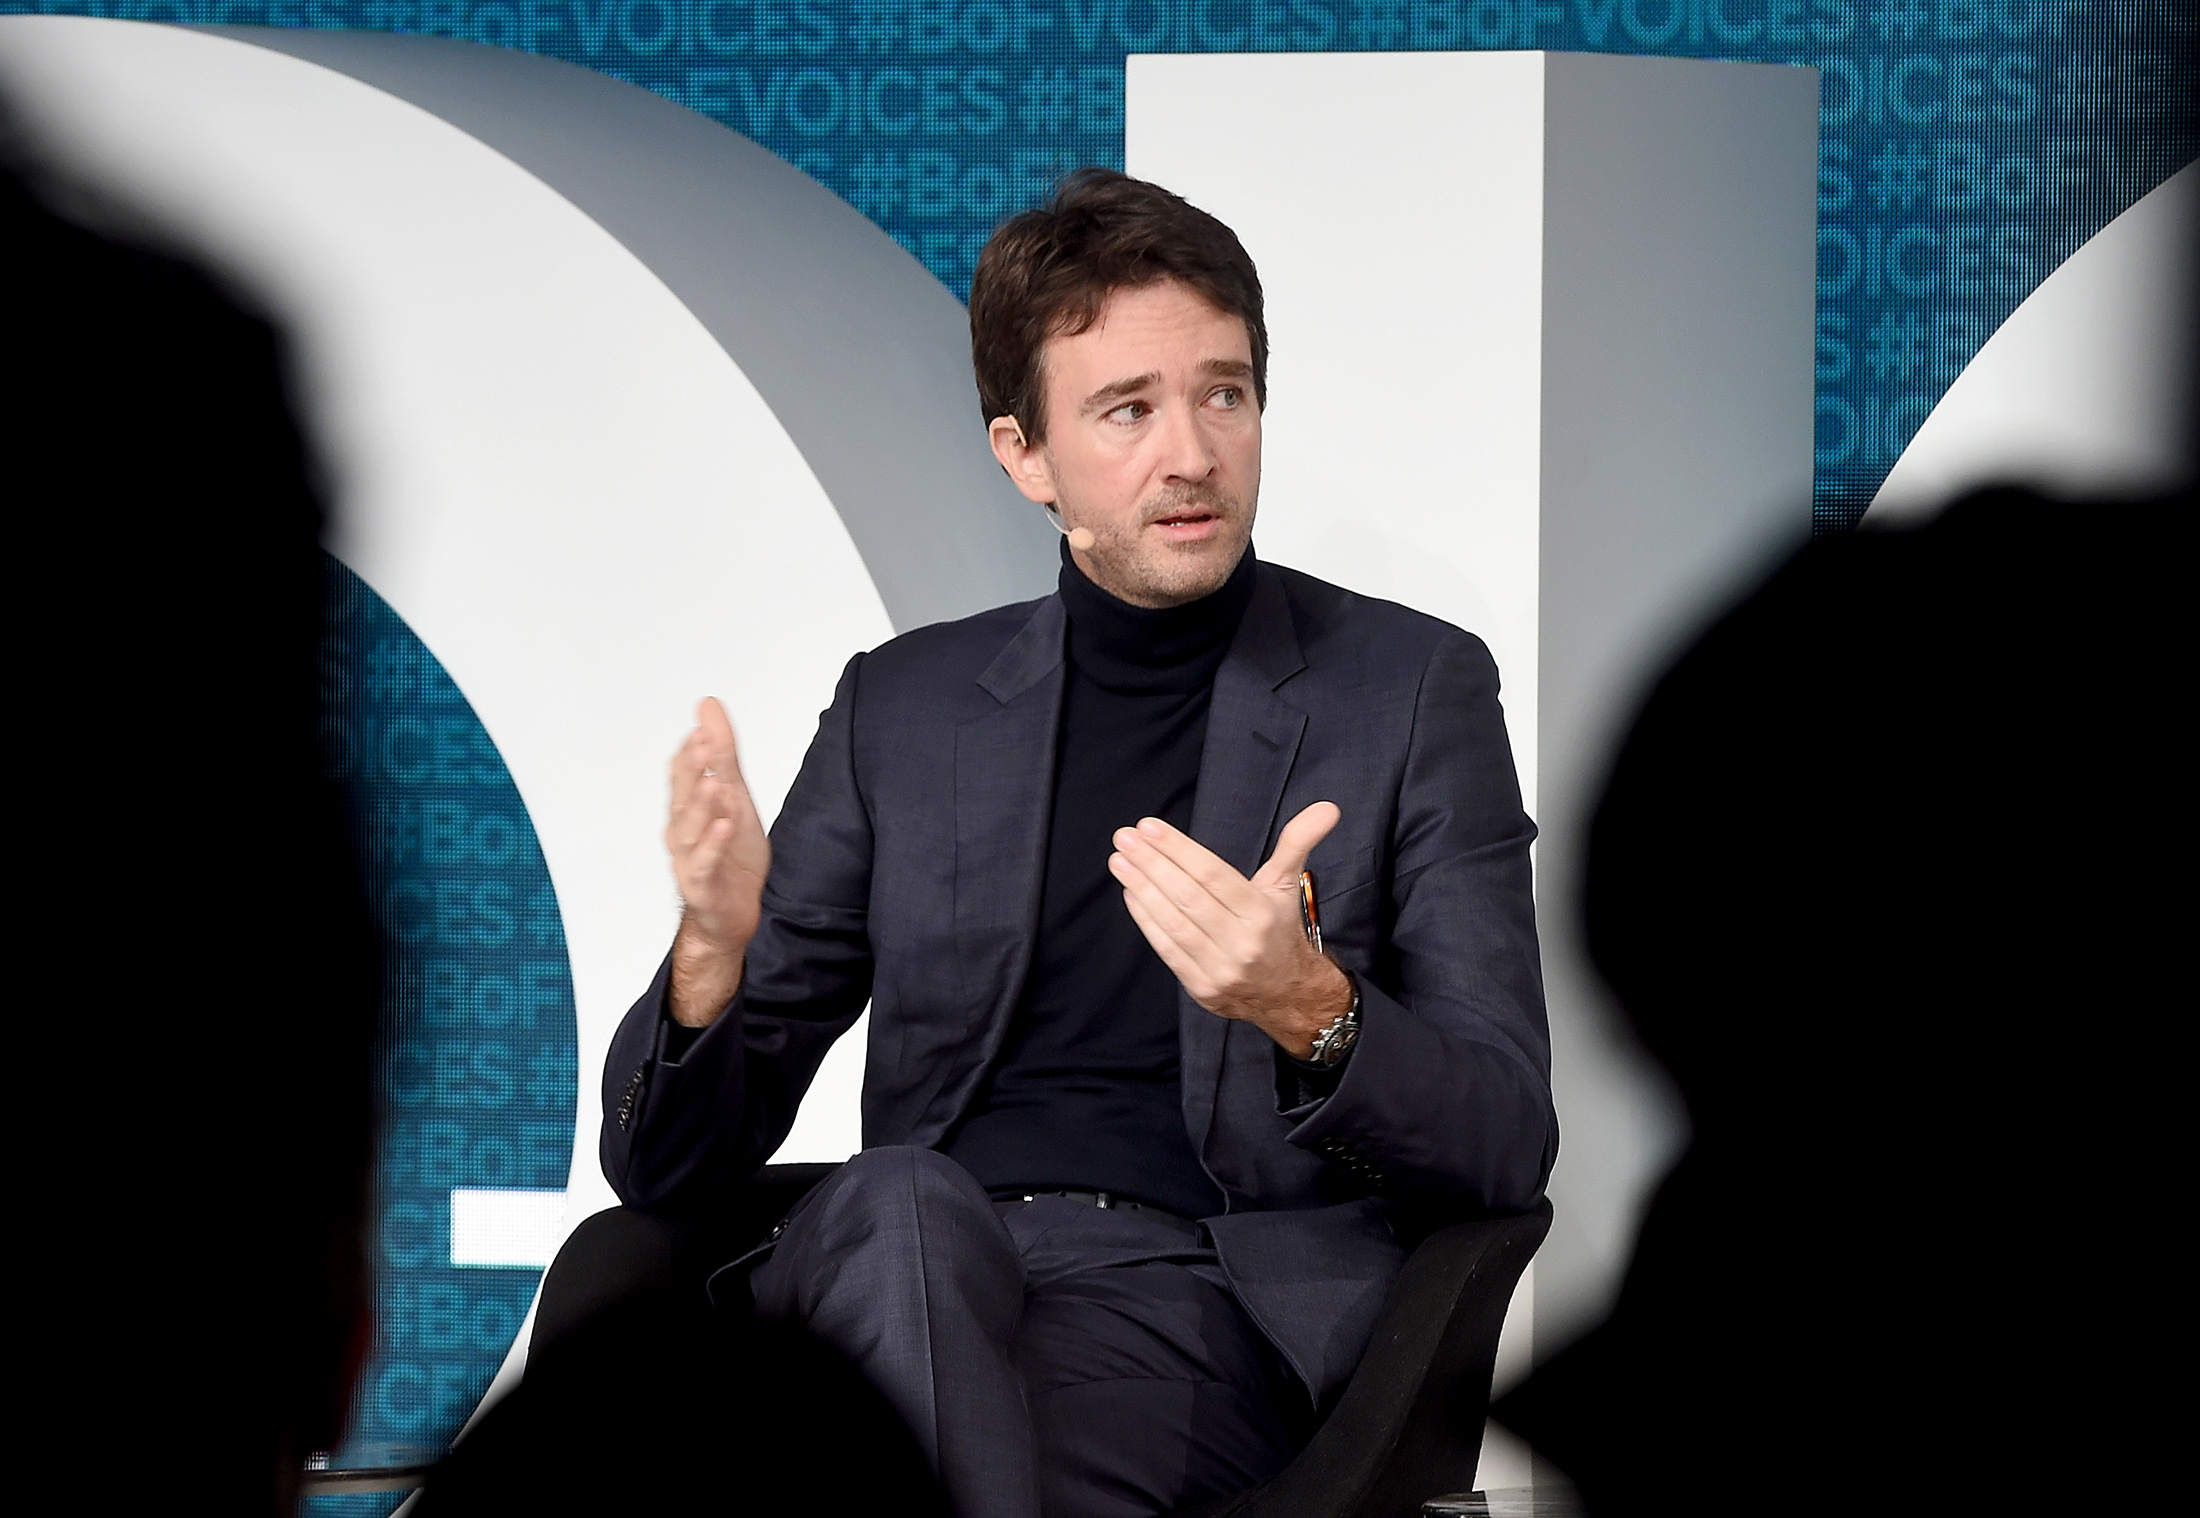 LVMH's Antoine Arnault Takes Up Group Image as Heirs Flex Muscle